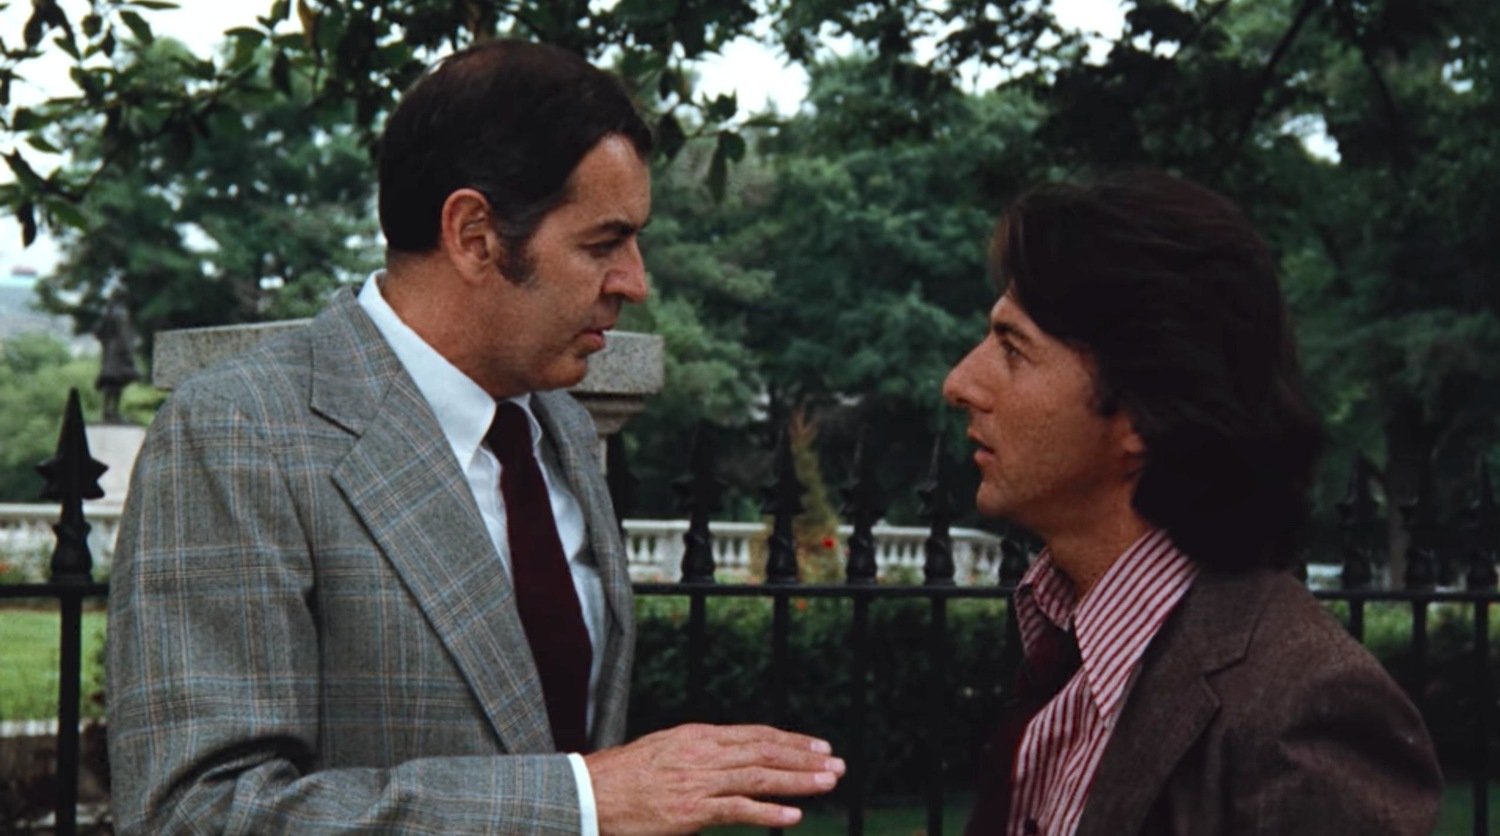 Jess Osuna and Dustin Hoffman in All the President's Men